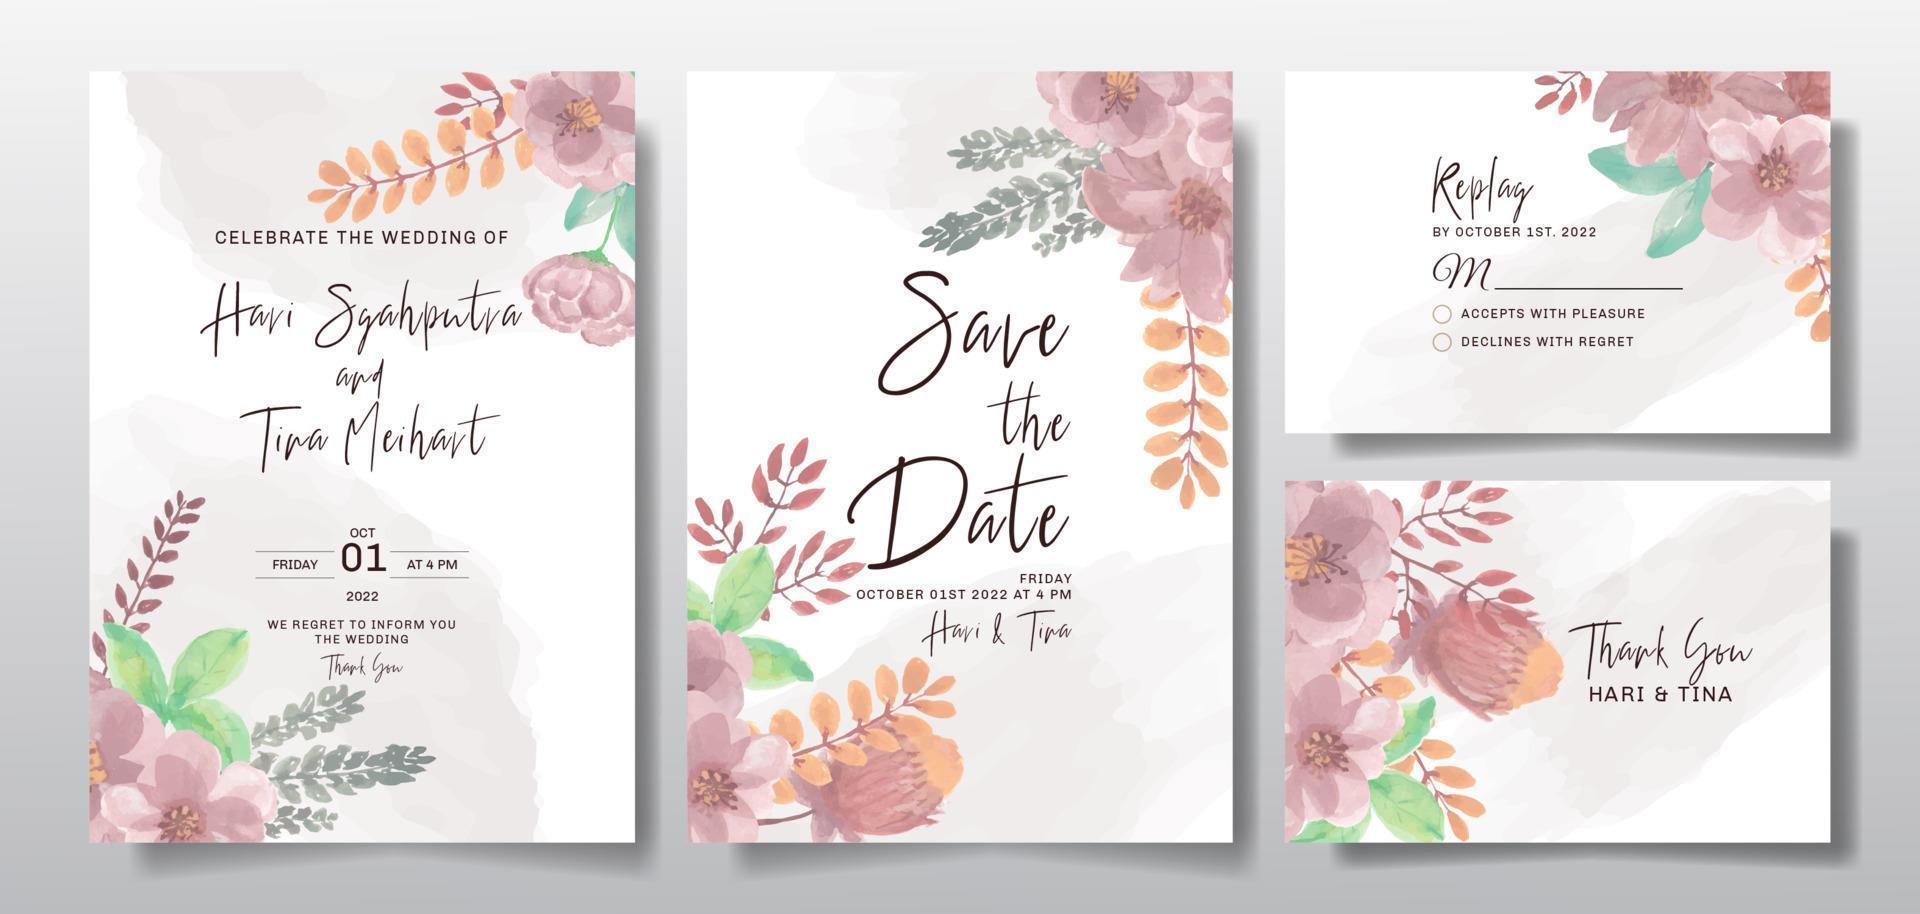 Wedding invitation greeting card with watercolor flower or leaves design background vector